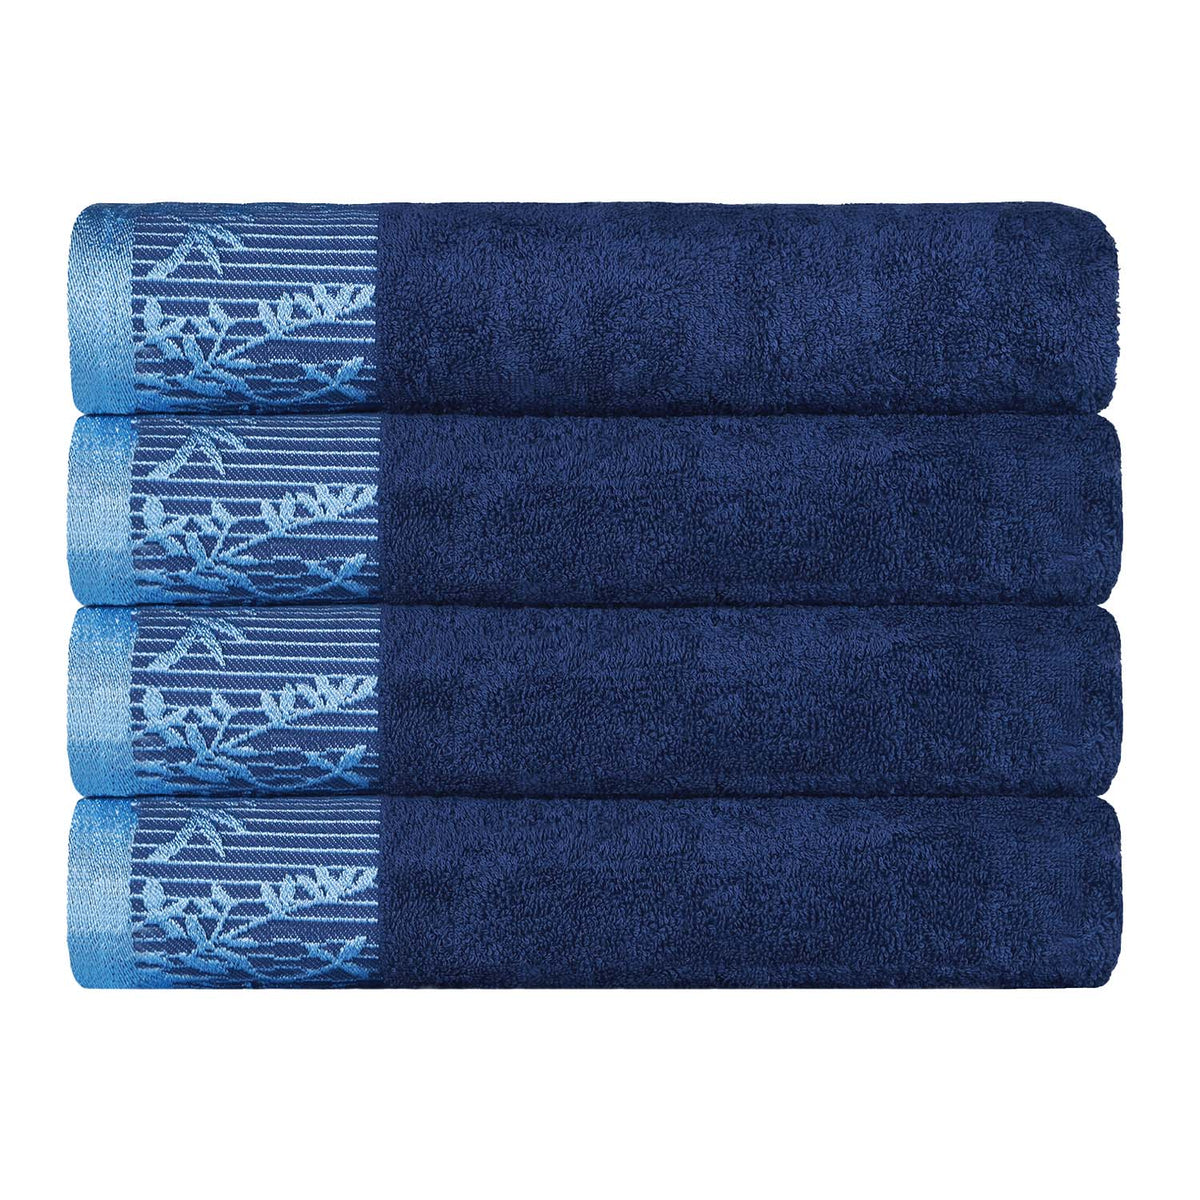 Wisteria Cotton Floral Embroidered Jacquard Border Bath Towel - Navy Blue